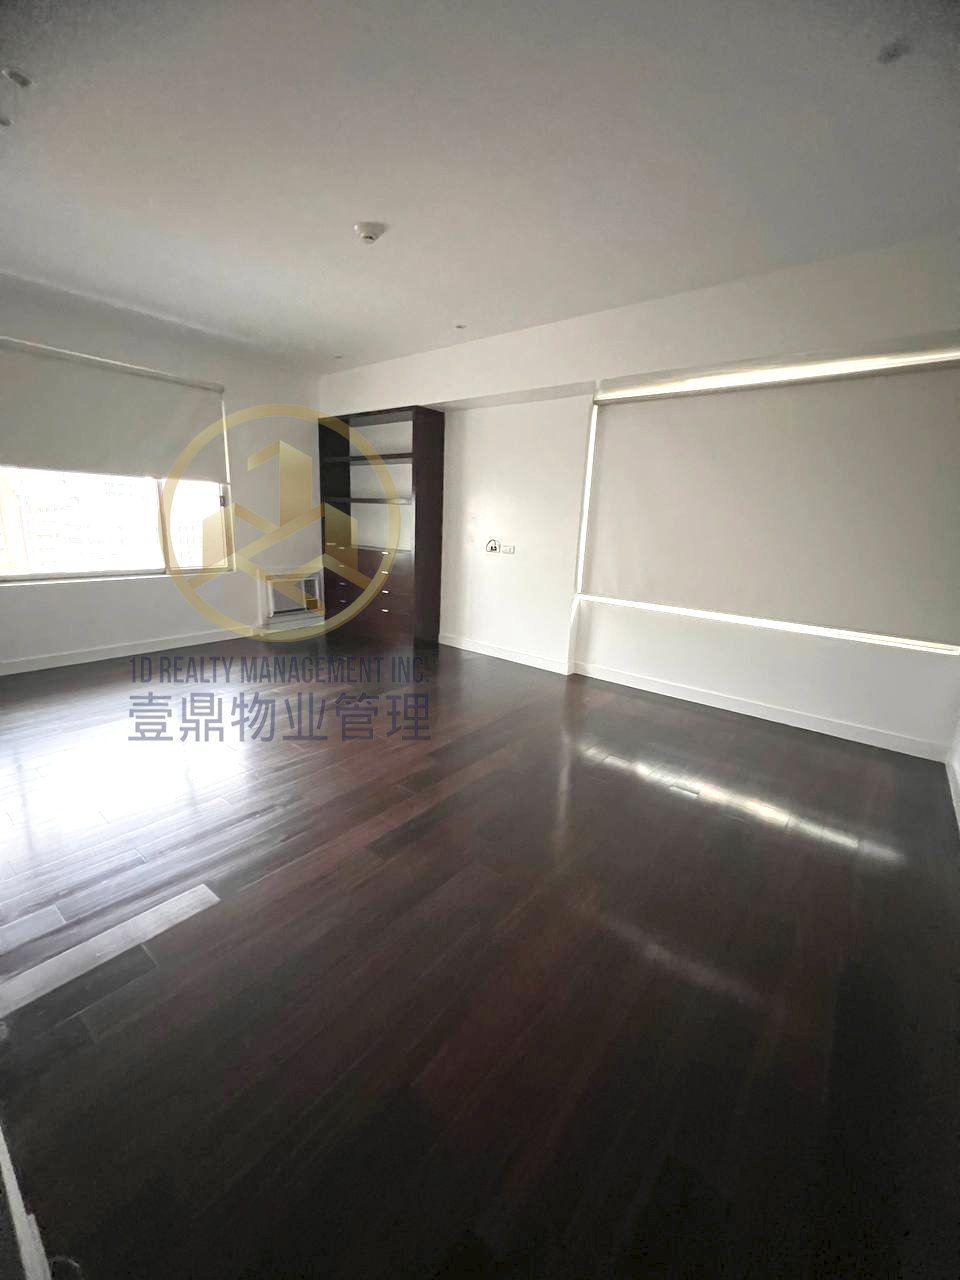 One Salcedo Place Makati City - For Lease